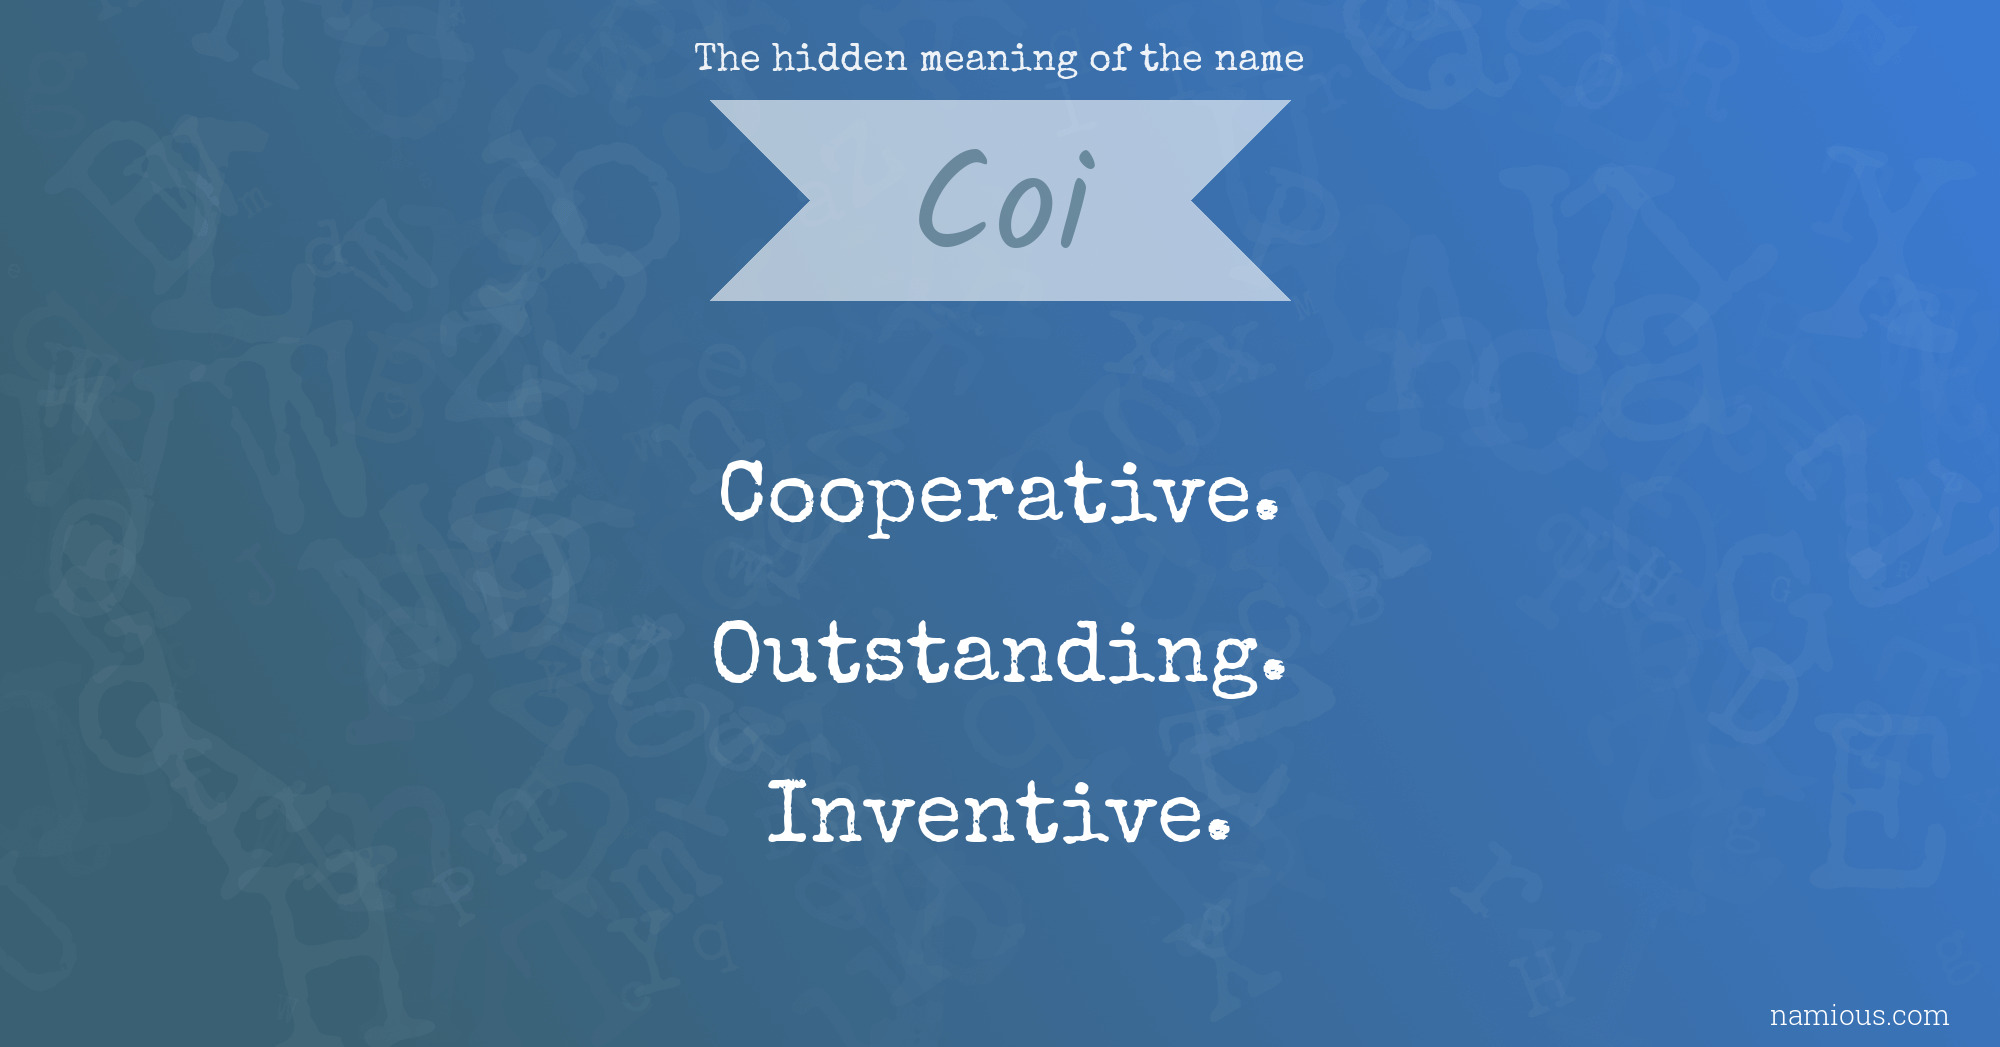 The hidden meaning of the name Coi